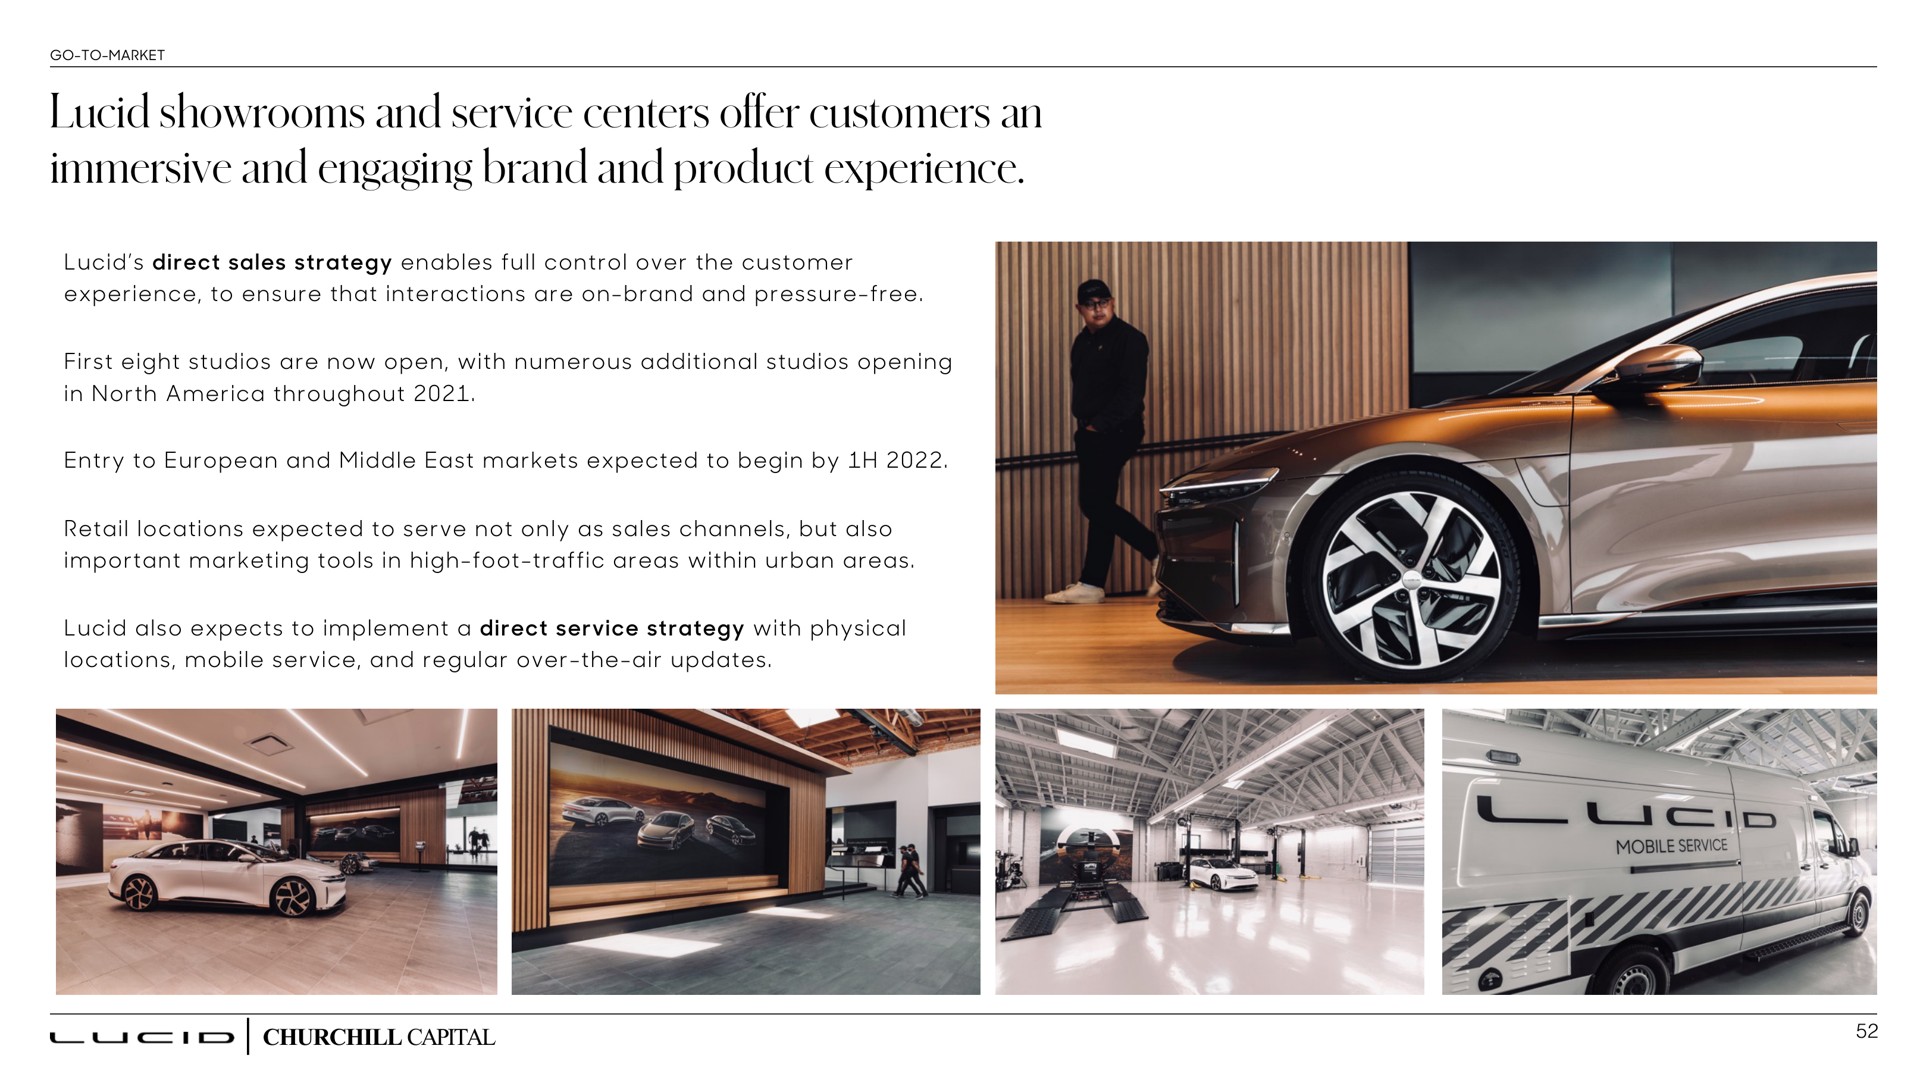 lucid showrooms and service centers offer customers an immersive and engaging brand and product experience | Lucid Motors